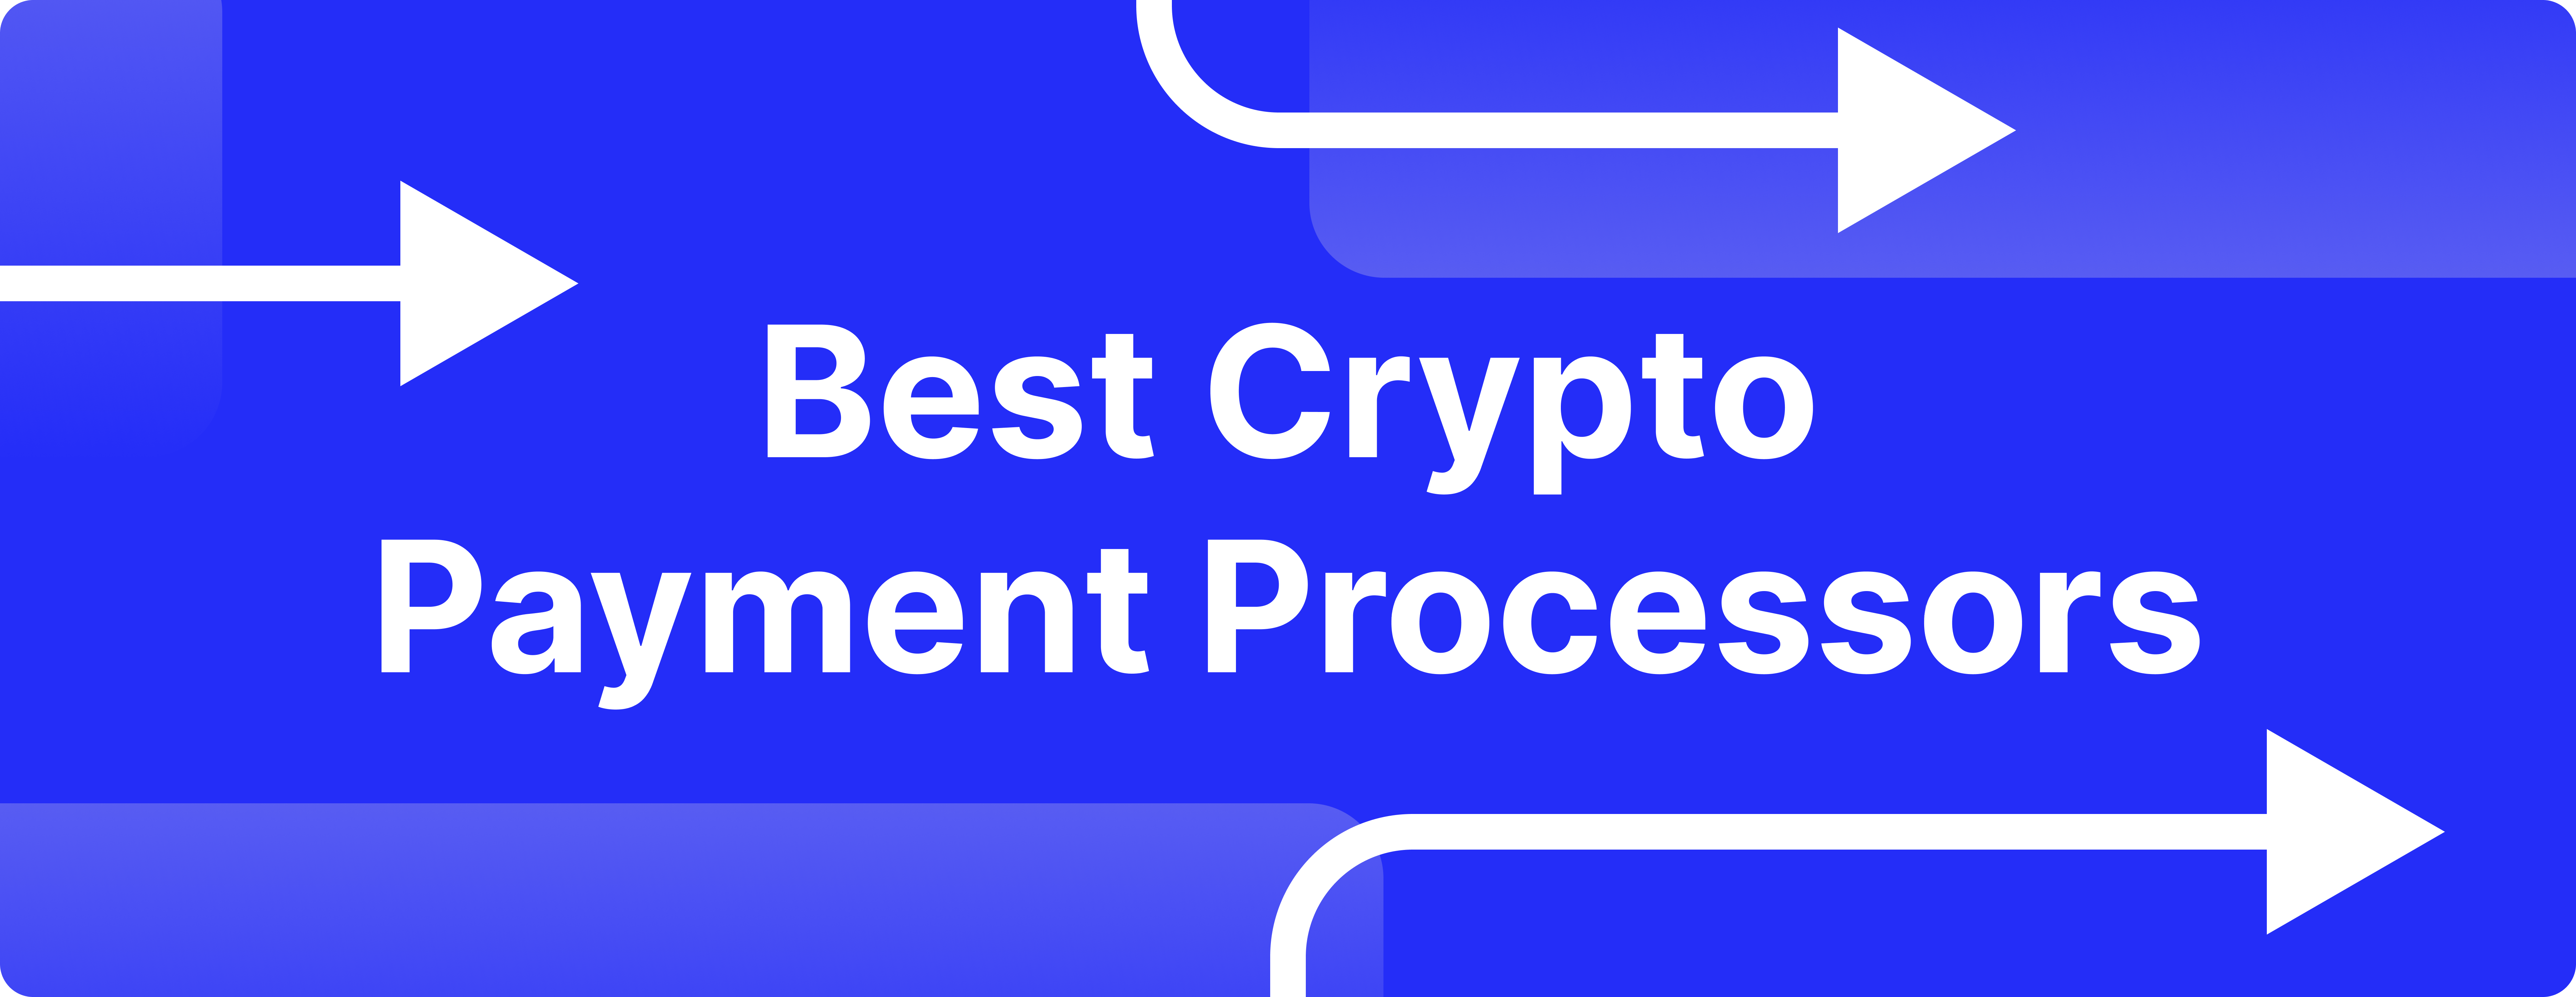  Finding the best crypto payment processor for business